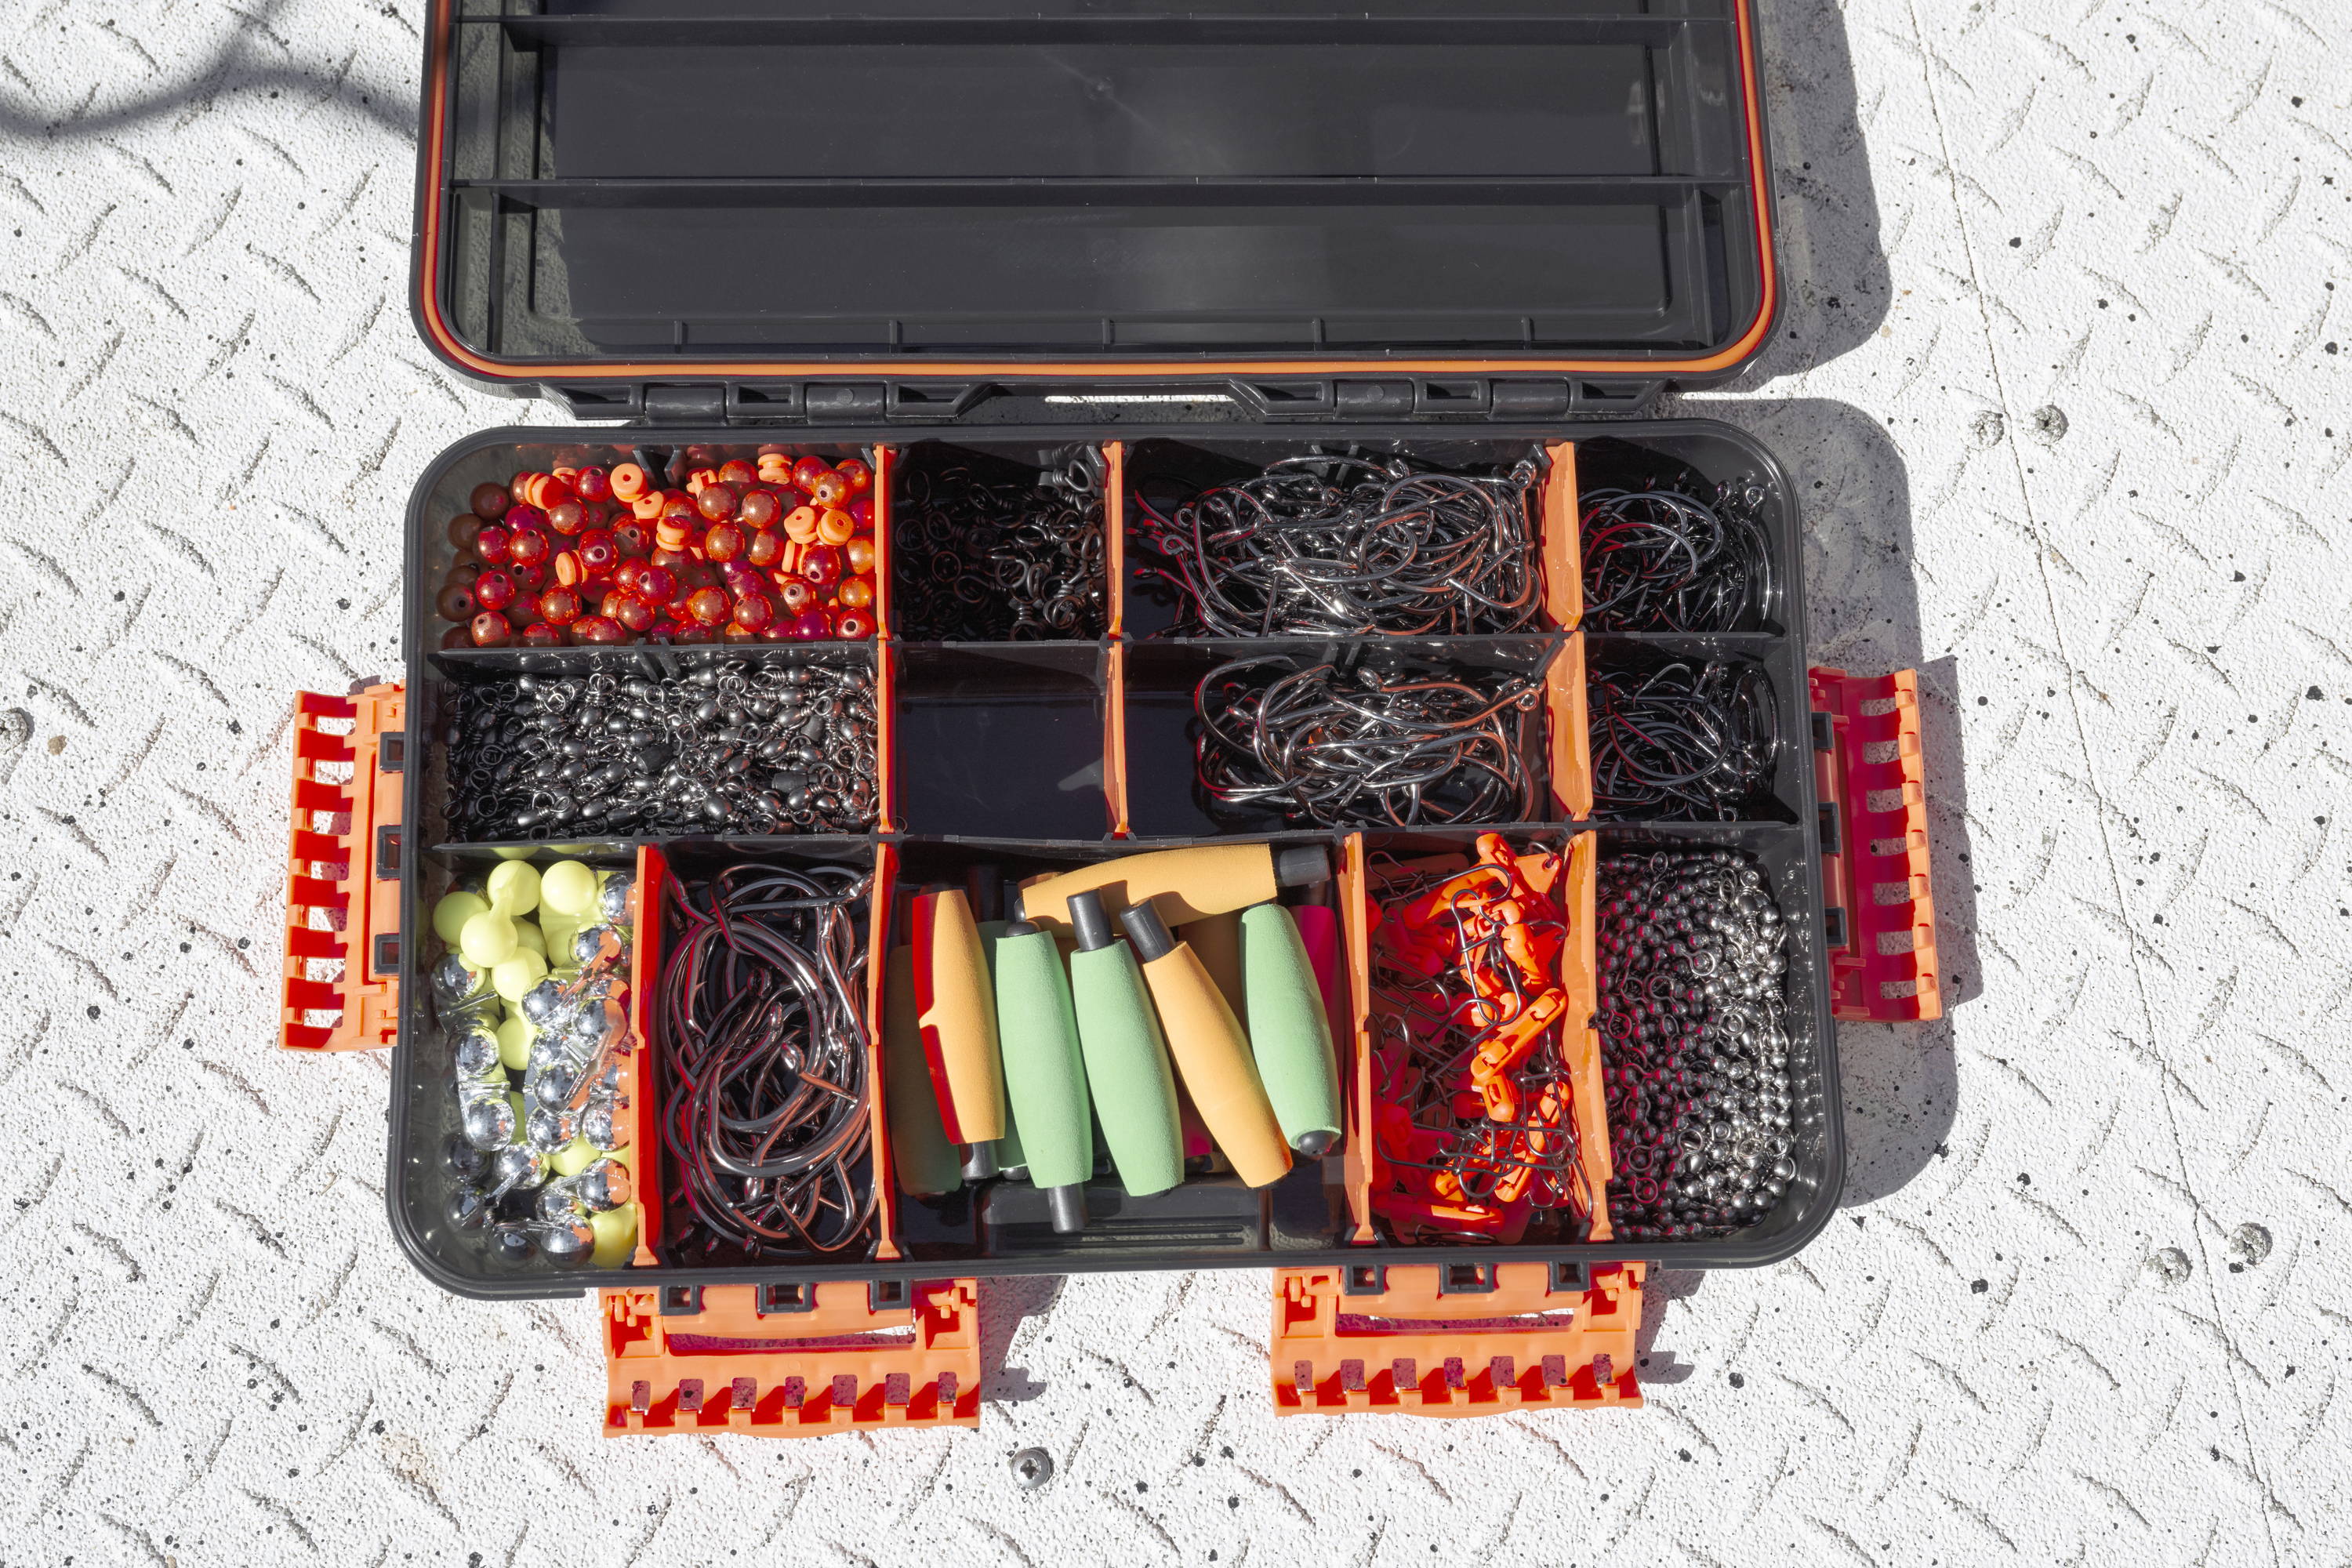 WST - Durable waterproof tackle boxes designed to keep fishing gear organized and protected from the elements